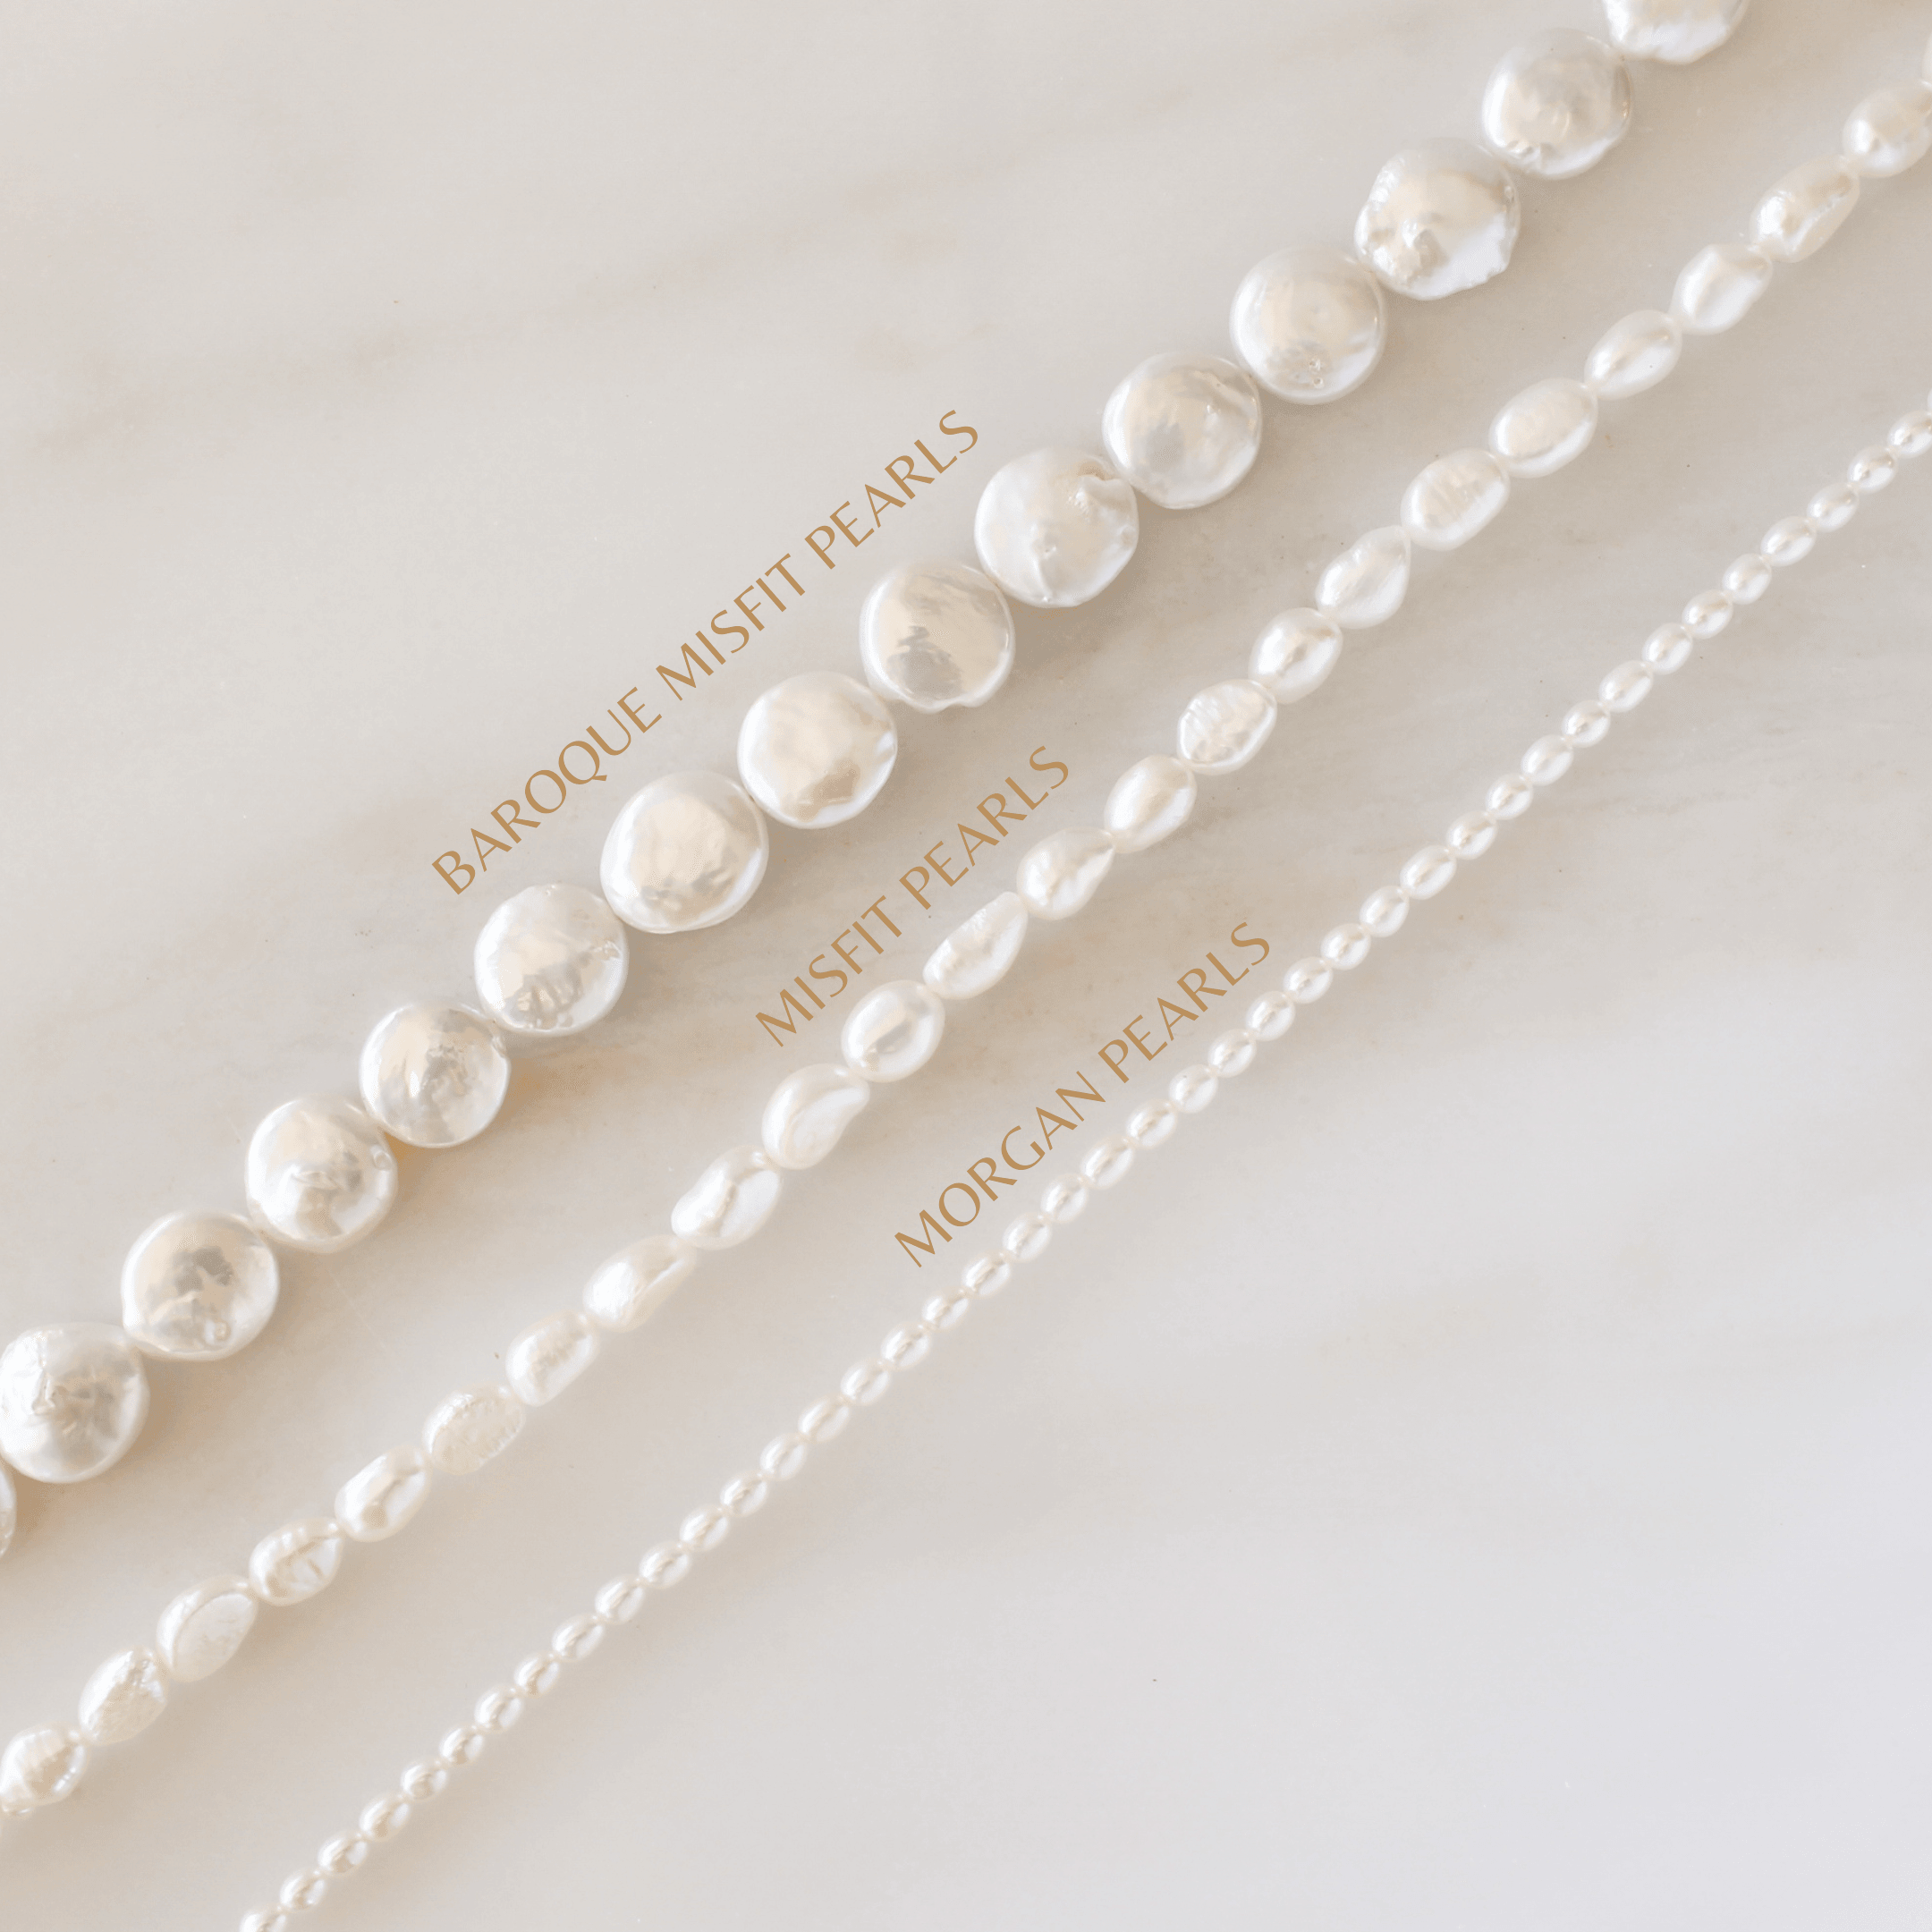 Misfit Pearl Necklace - Nolia Jewelry - Meaningful + Sustainably Handcrafted Jewelry